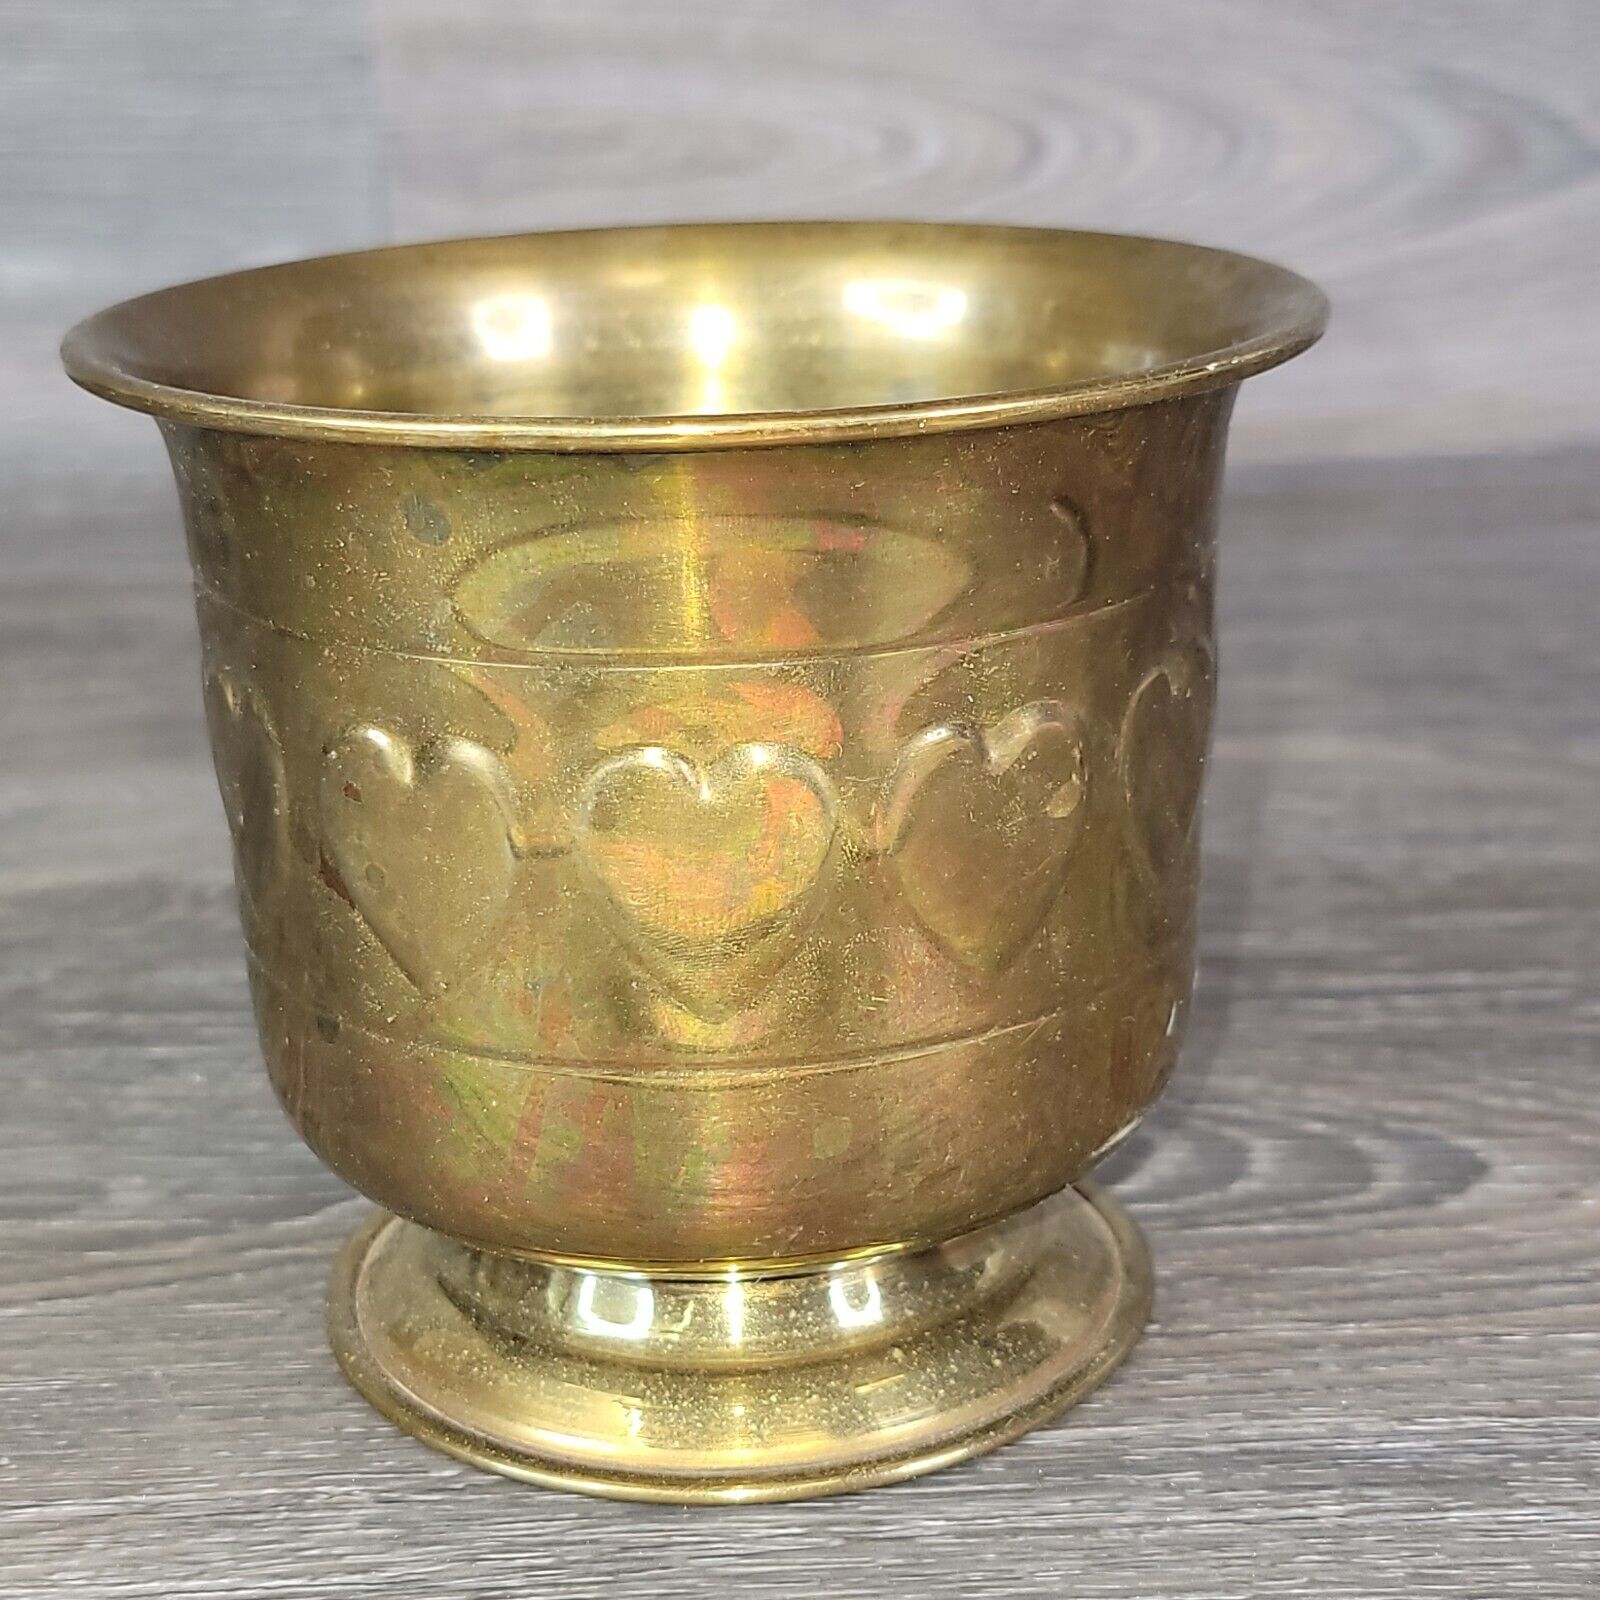 Vintage Brass Cup Goblet Mini Planter Gold Tone small 5